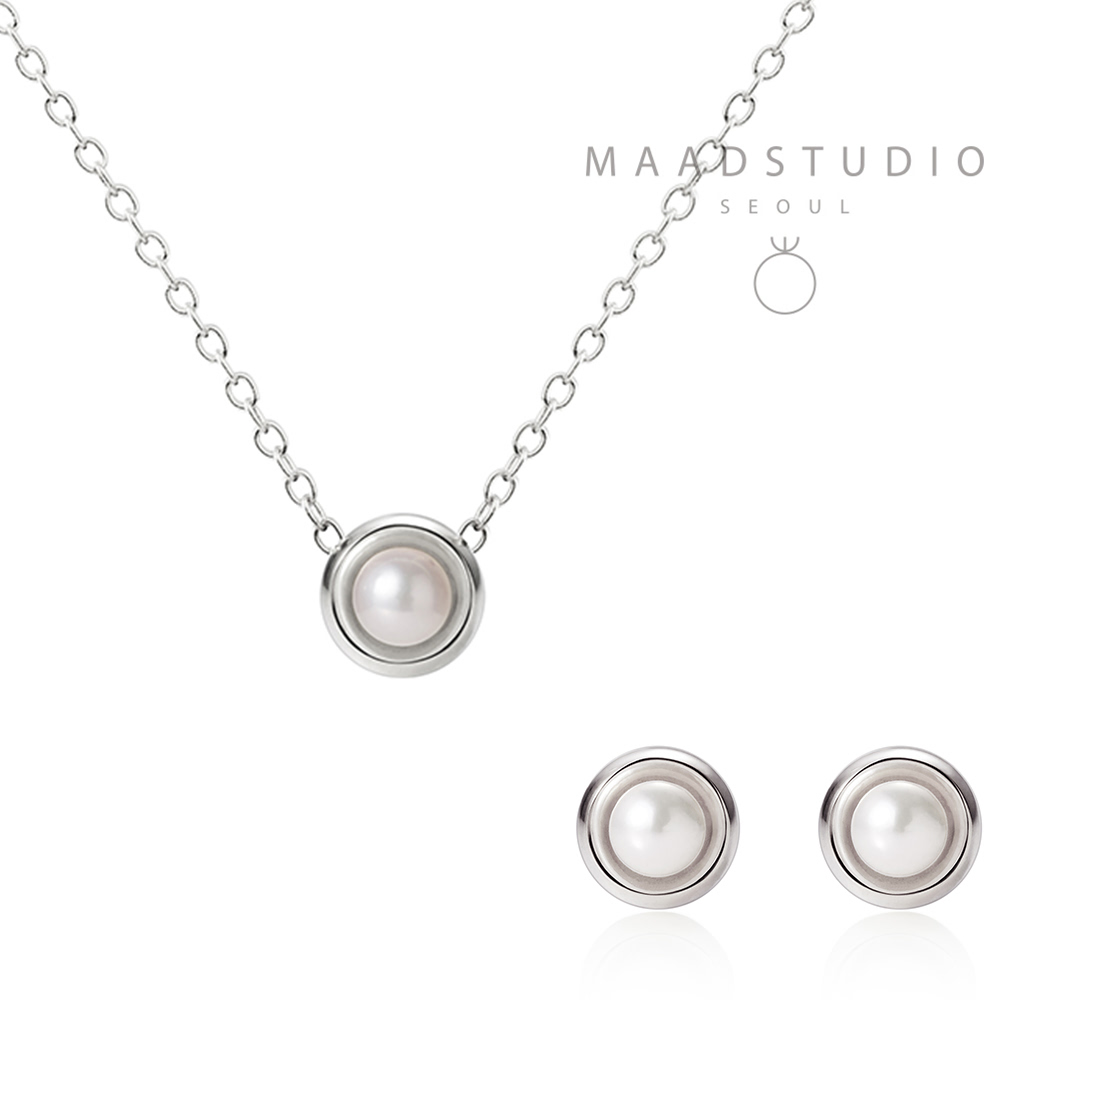 Cheese pendant & earring Set 14k white gold 3mm south sea pearl